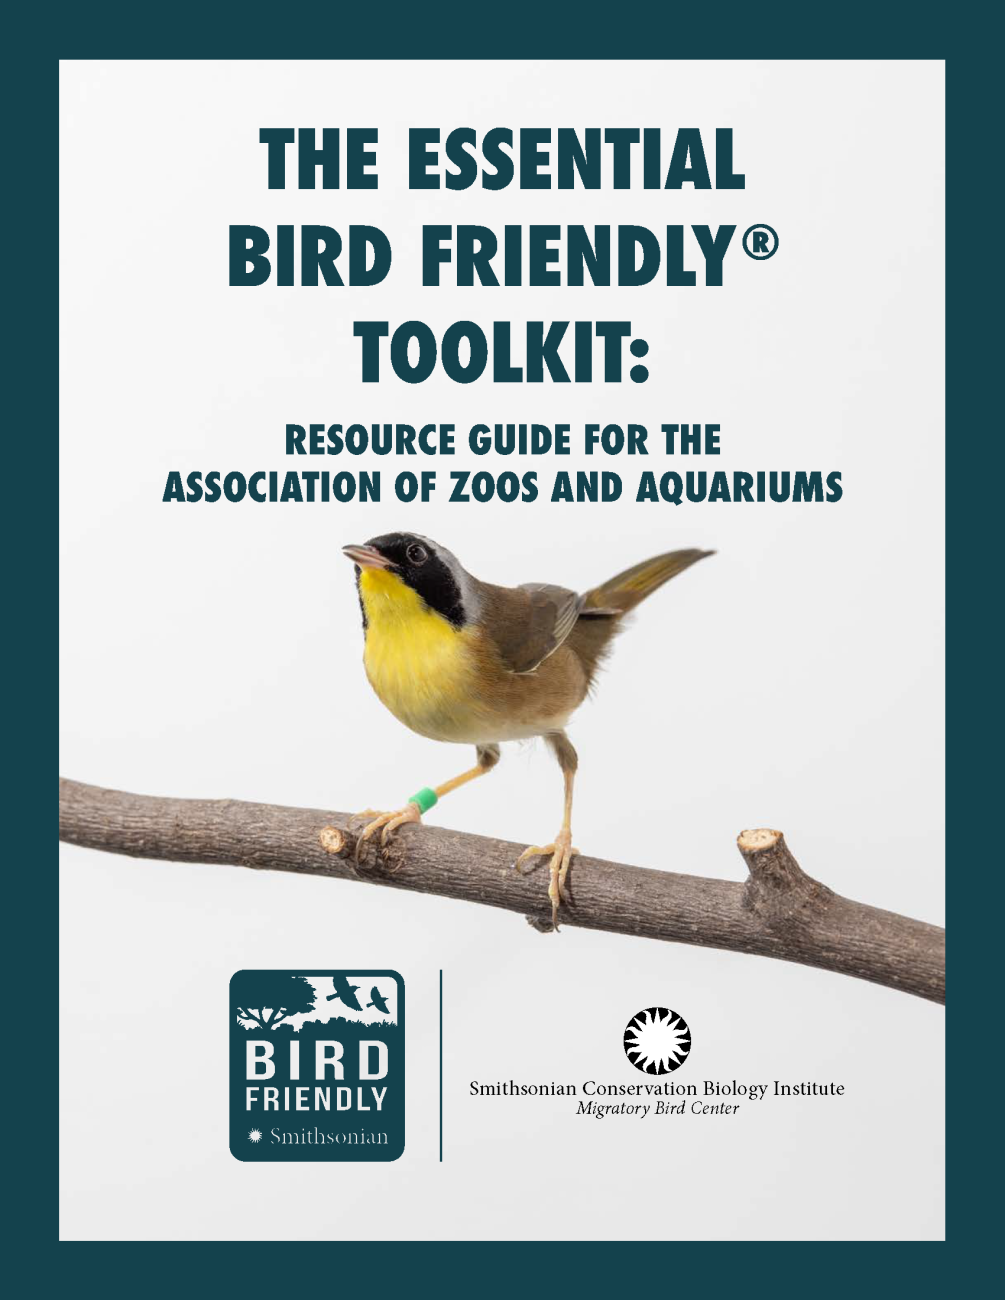 The first page of the essential bird friendly toolkit PDF, featuring a yellow songbird perched on a branch and the Bird Friendly and Smithsonian Conservation Biology Institute logos